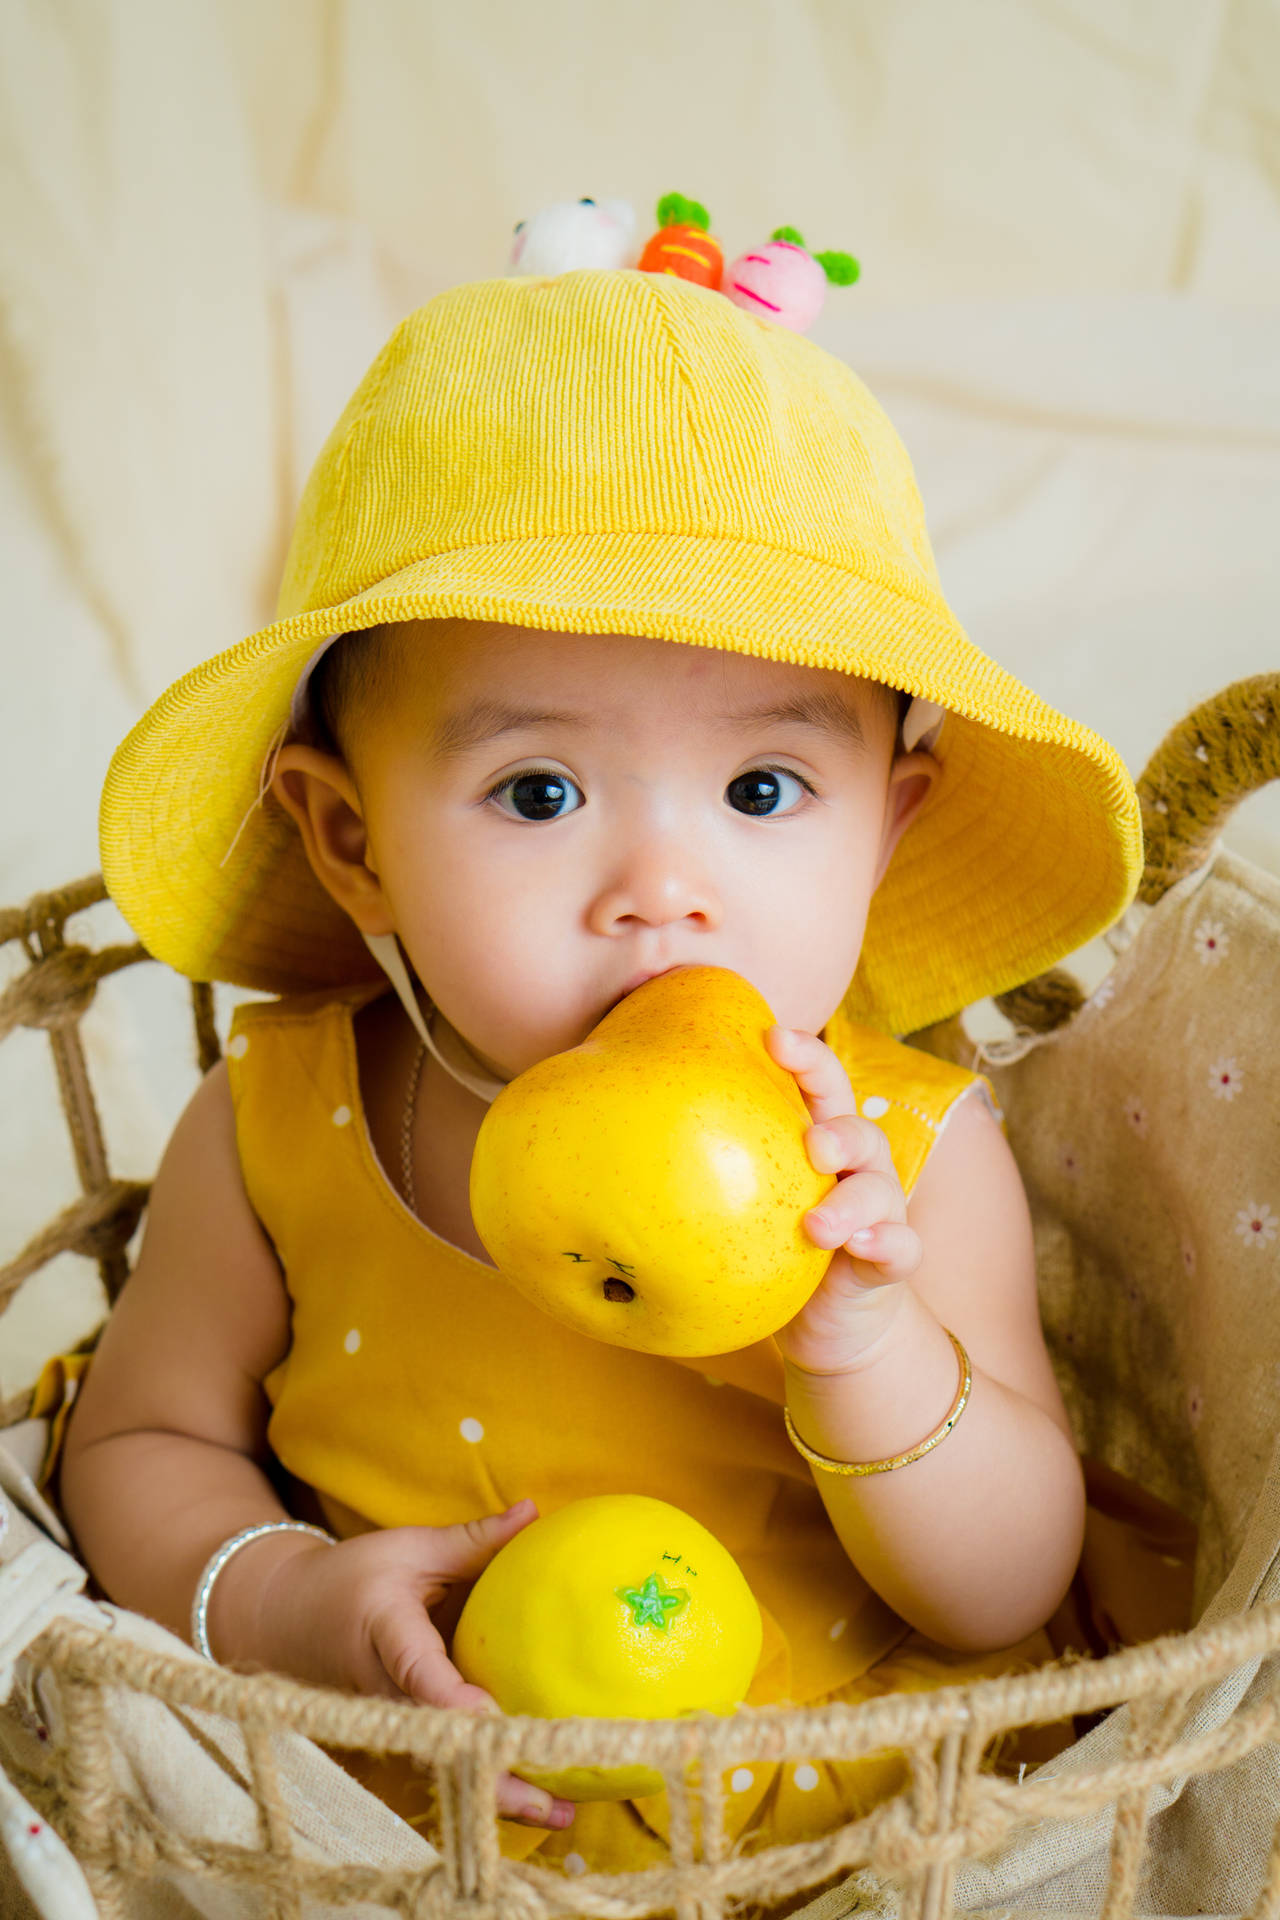 "Adorable Baby with Fruits in a Bucket Hat" Wallpaper